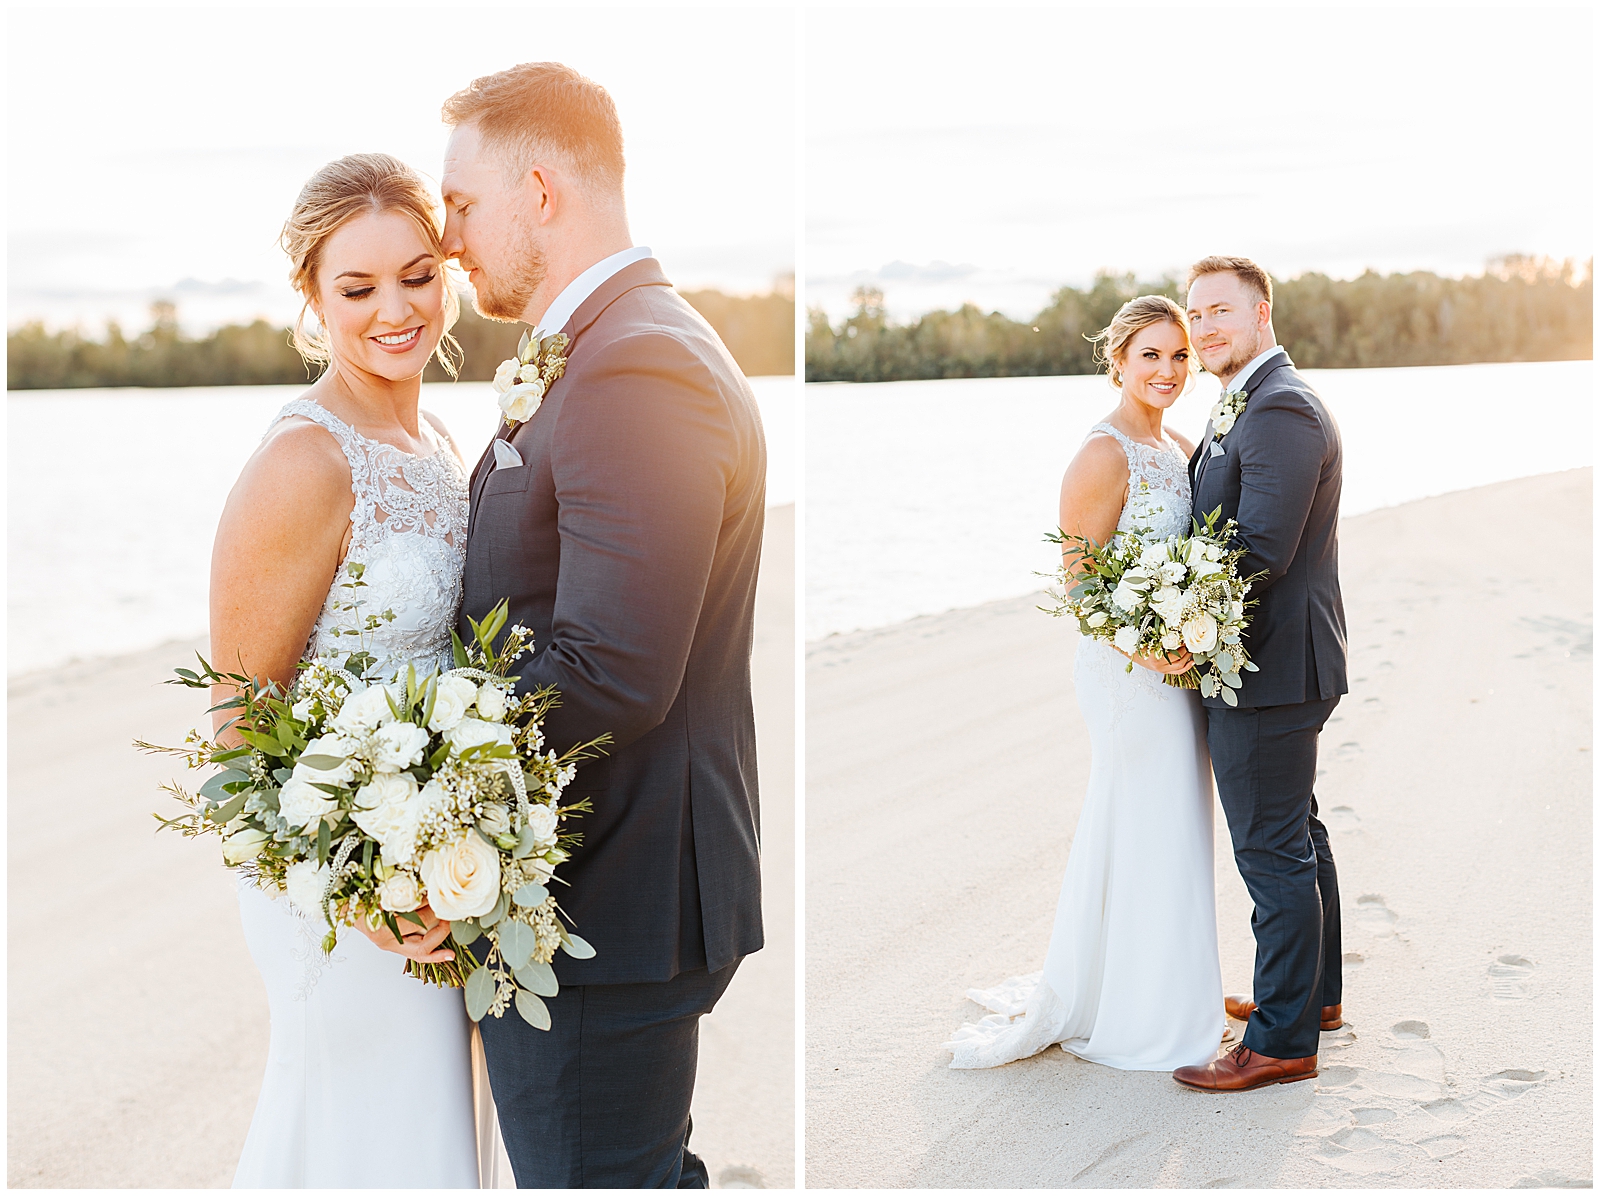 Golden Hour Portraits with the Bride and Groom 